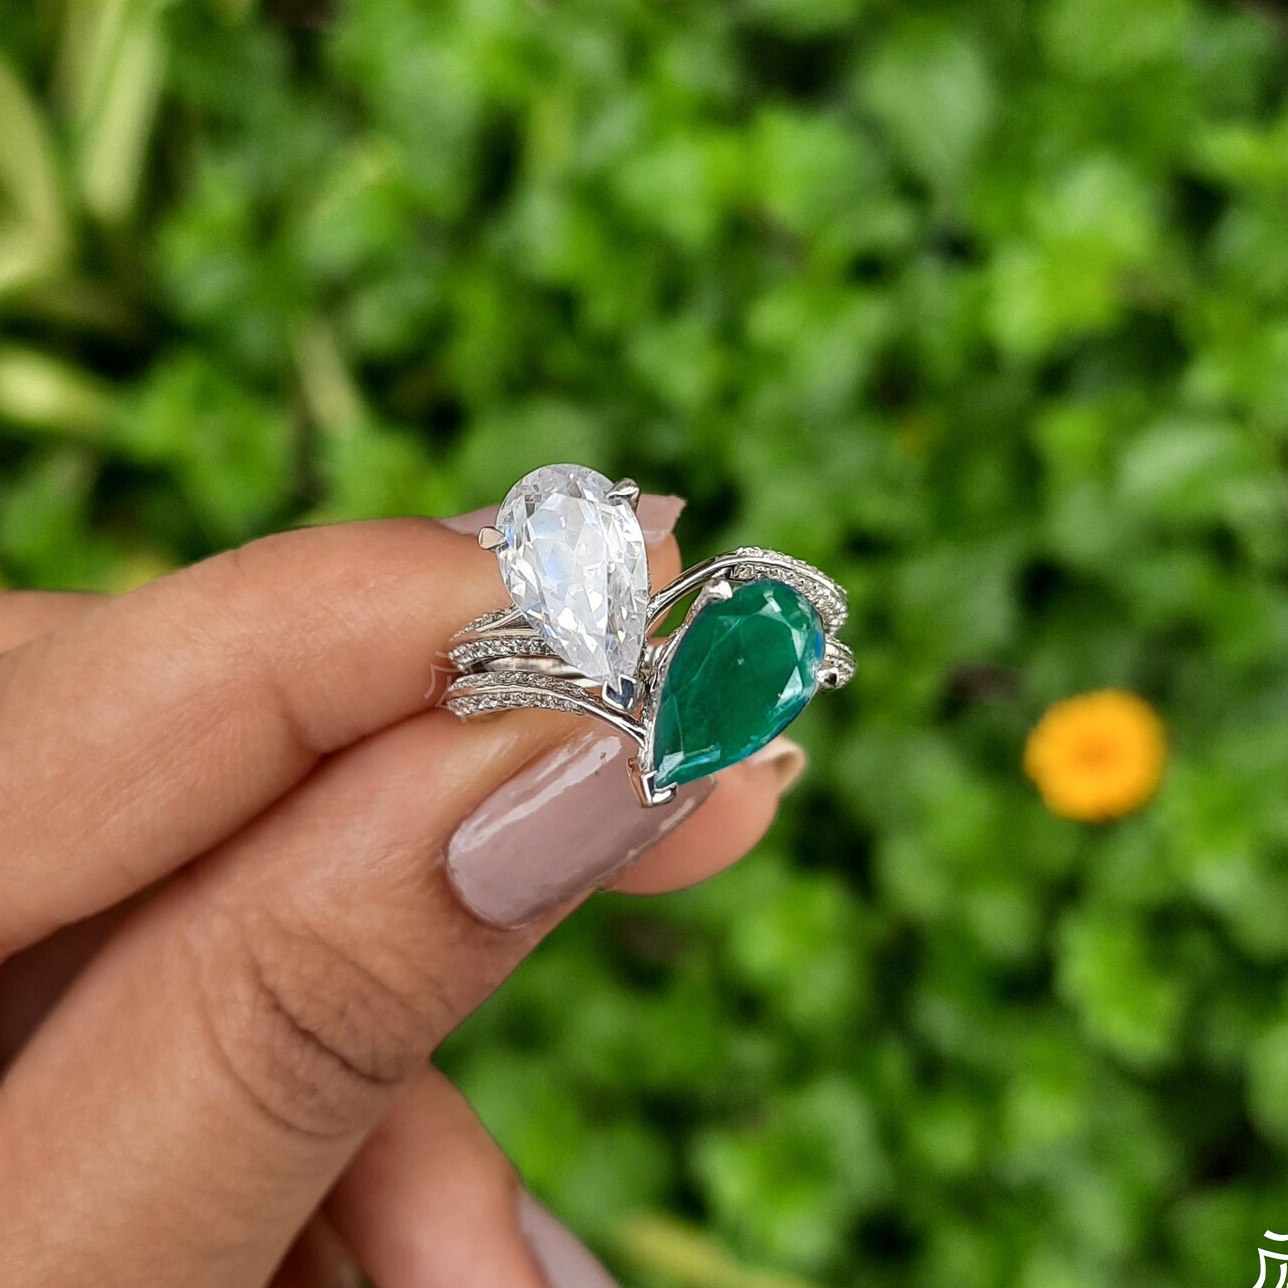 Decoding The Meaning Of Pear-Shaped Engagement Rings